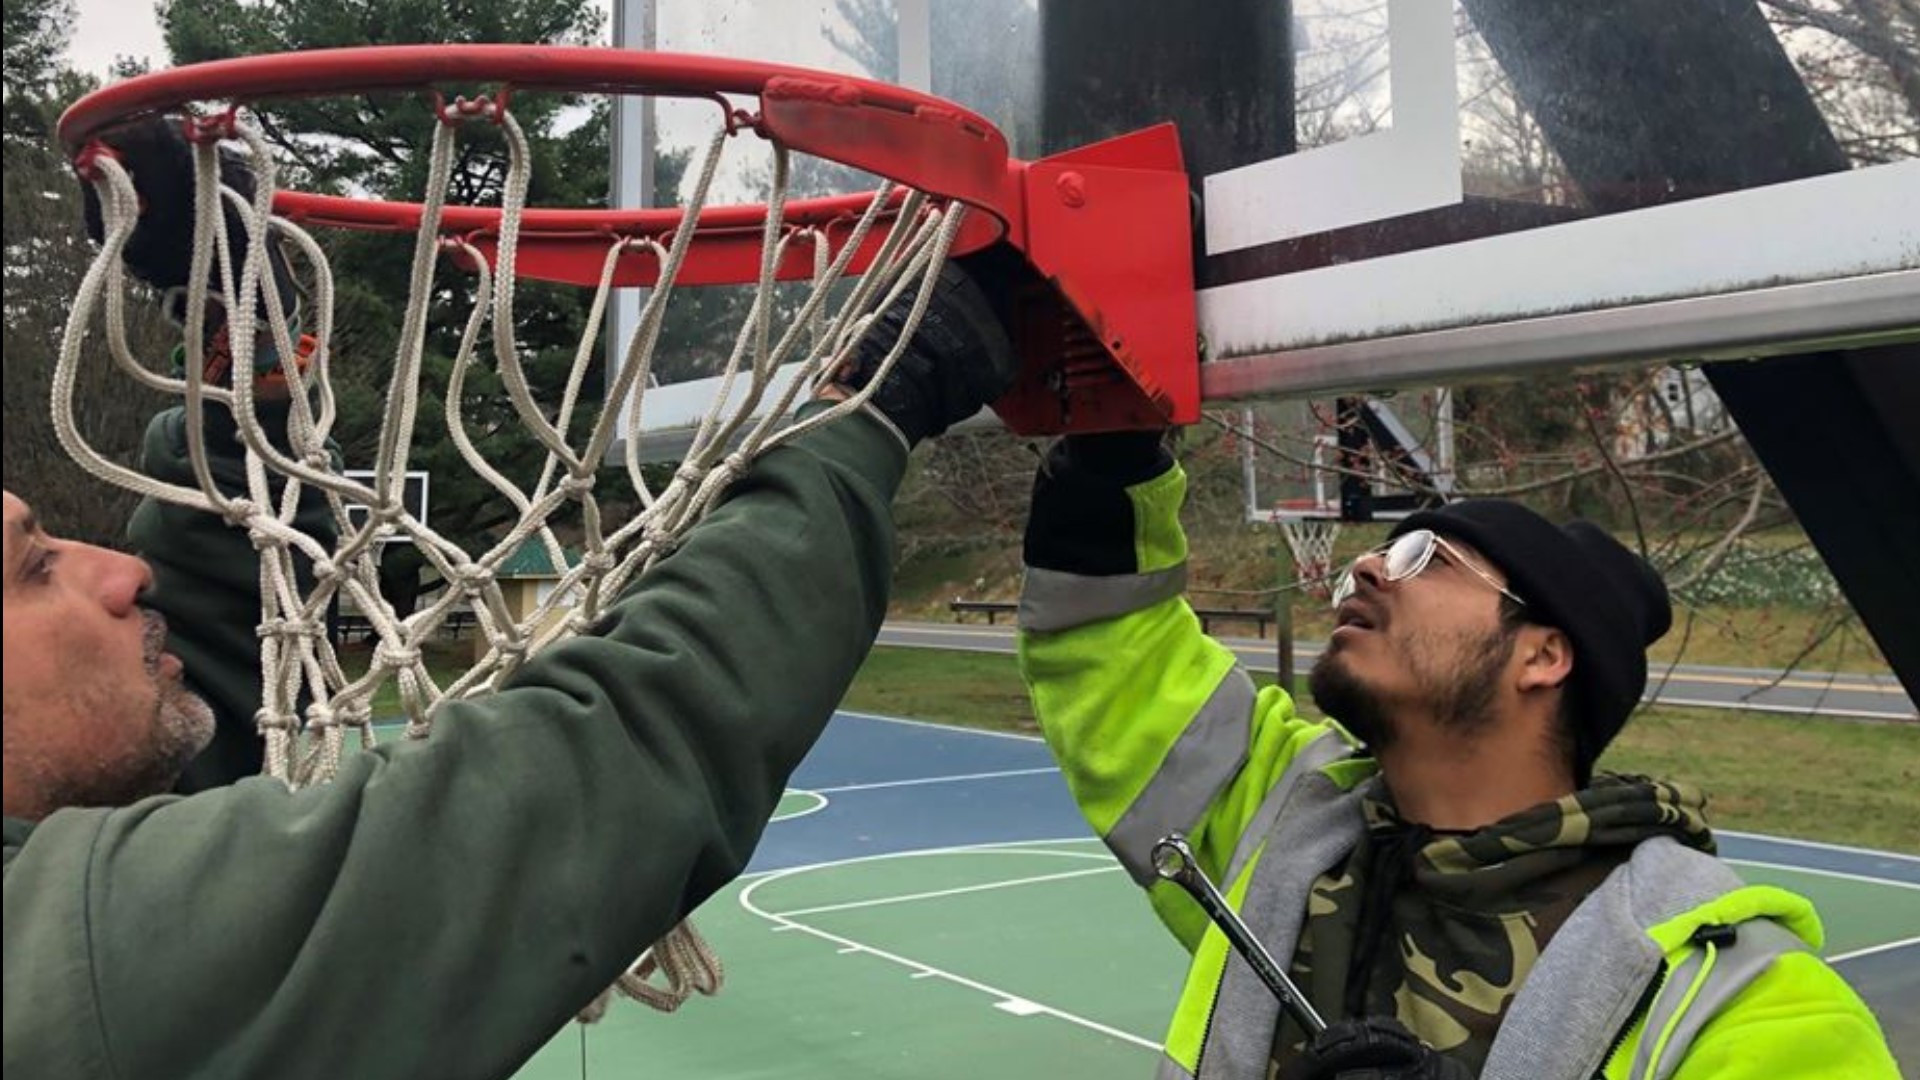 Fences going up, basketball hoops coming down, security guards deployed as weekend looms